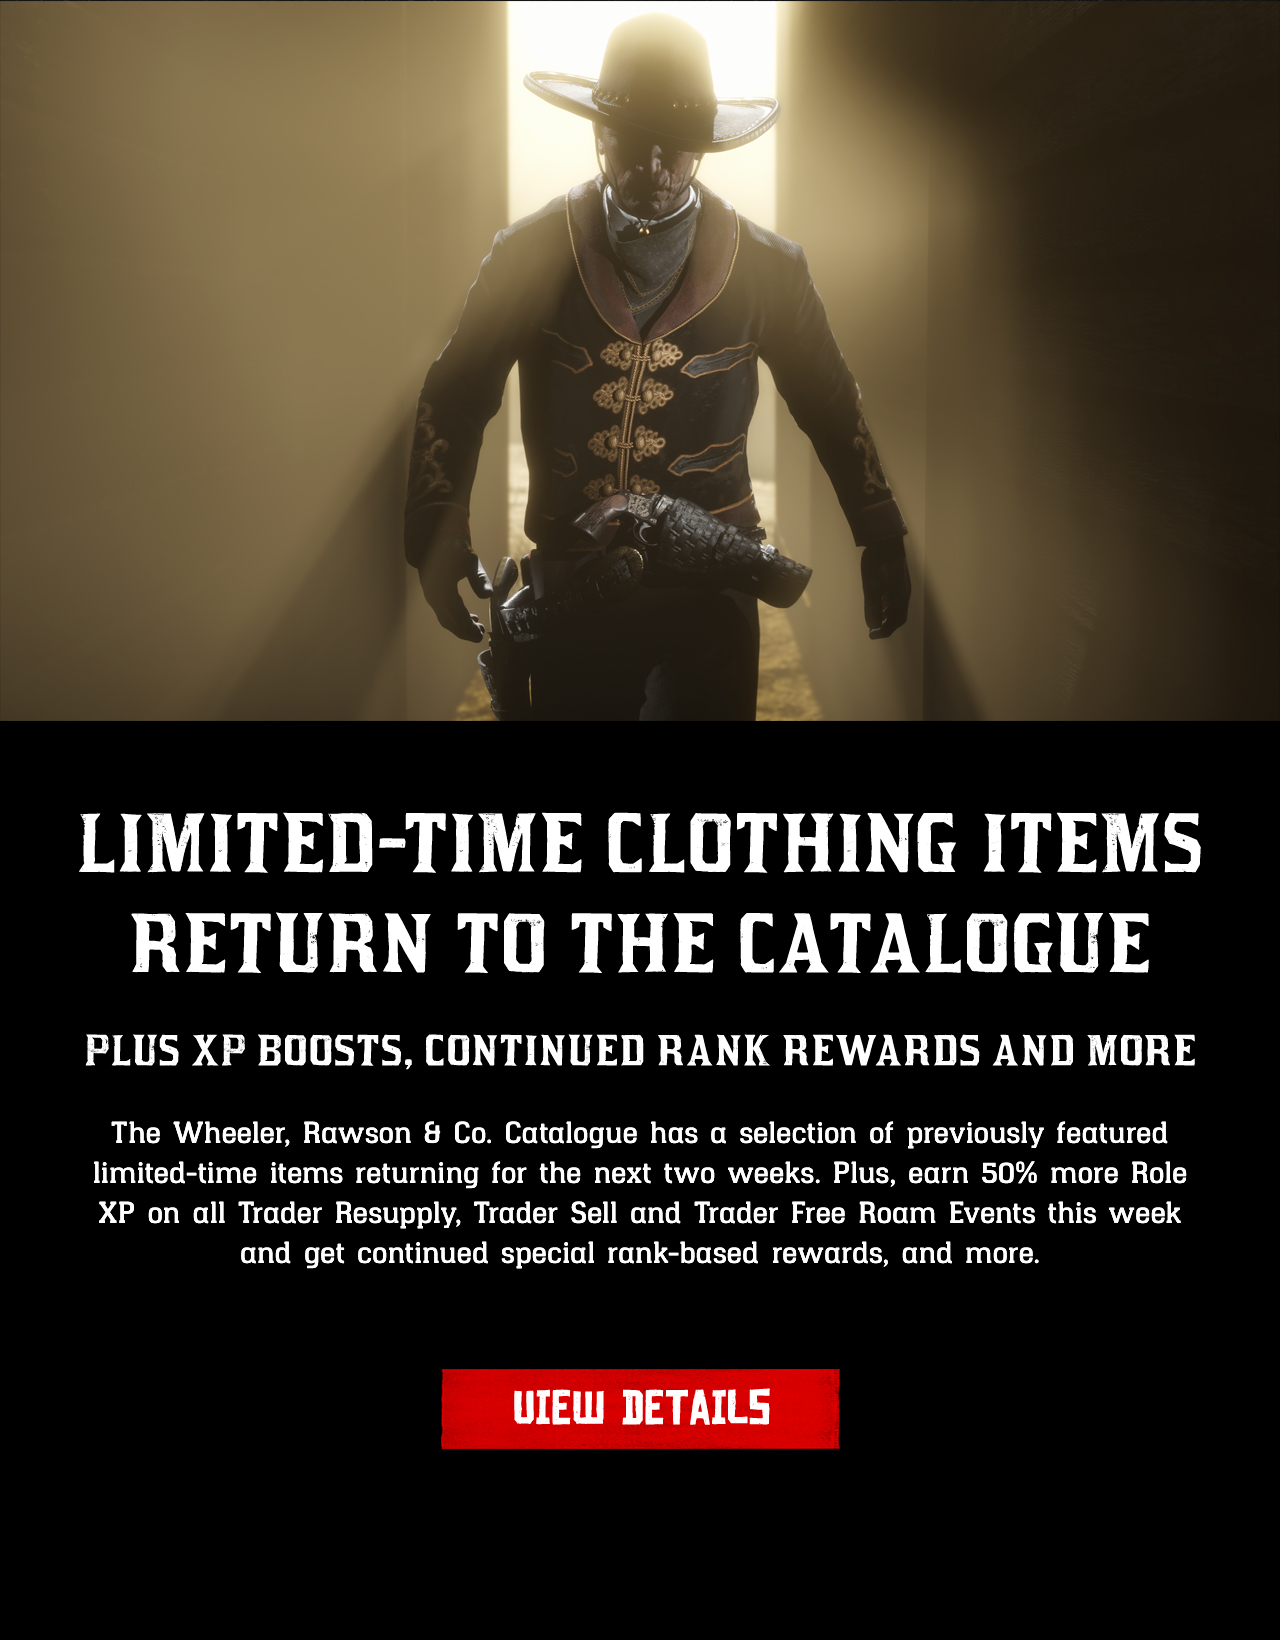 A selection of previously featured limited-time clothing items have returned to the Wheeler, Rawson and Co. Catalogue in Red Dead Online this week. Plus XP boosts, special rank-based rewards and more.